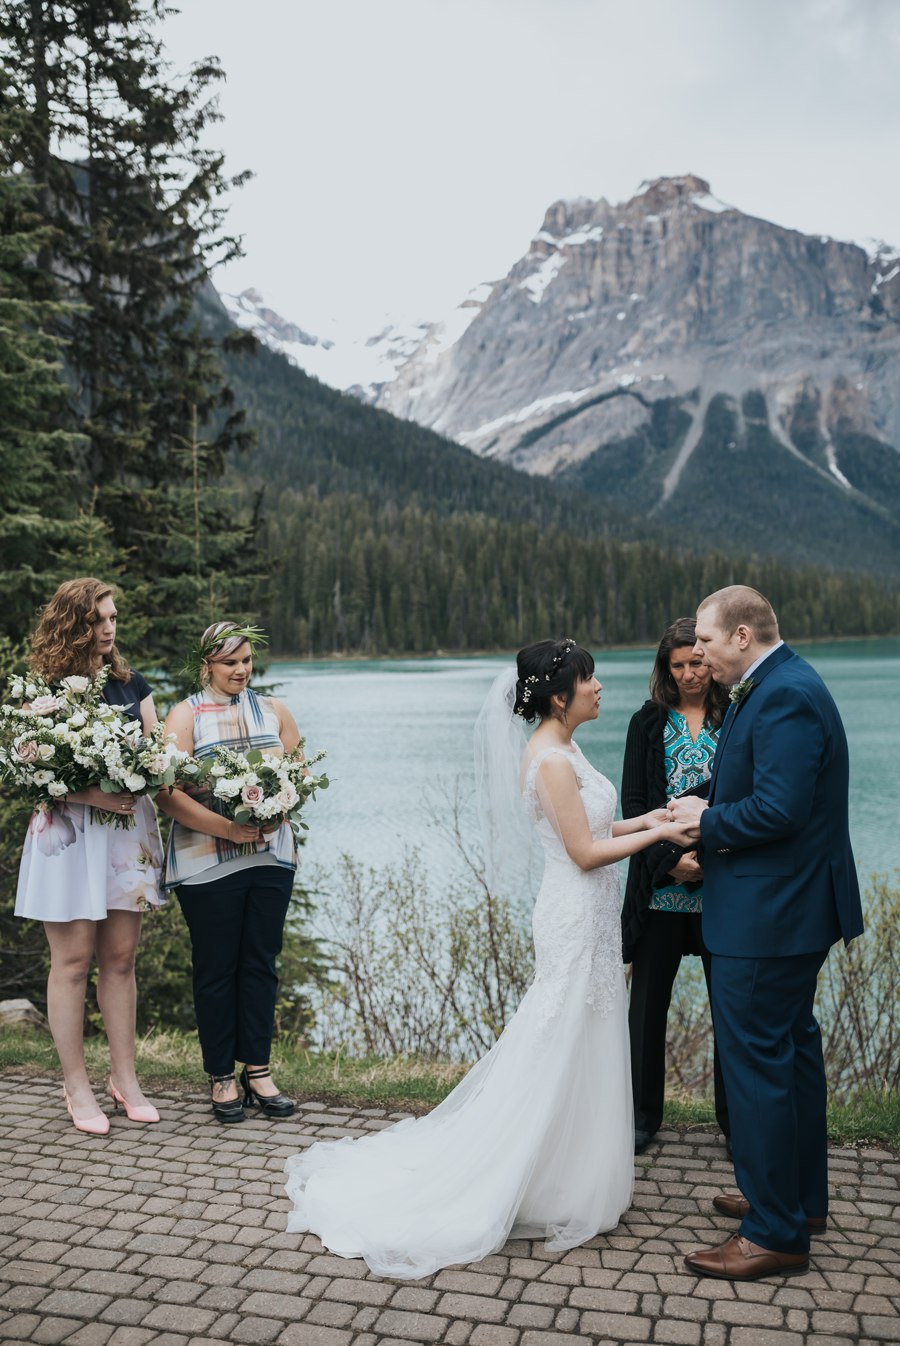 emerald lake lodge intimate wedding ceremony viewpoint